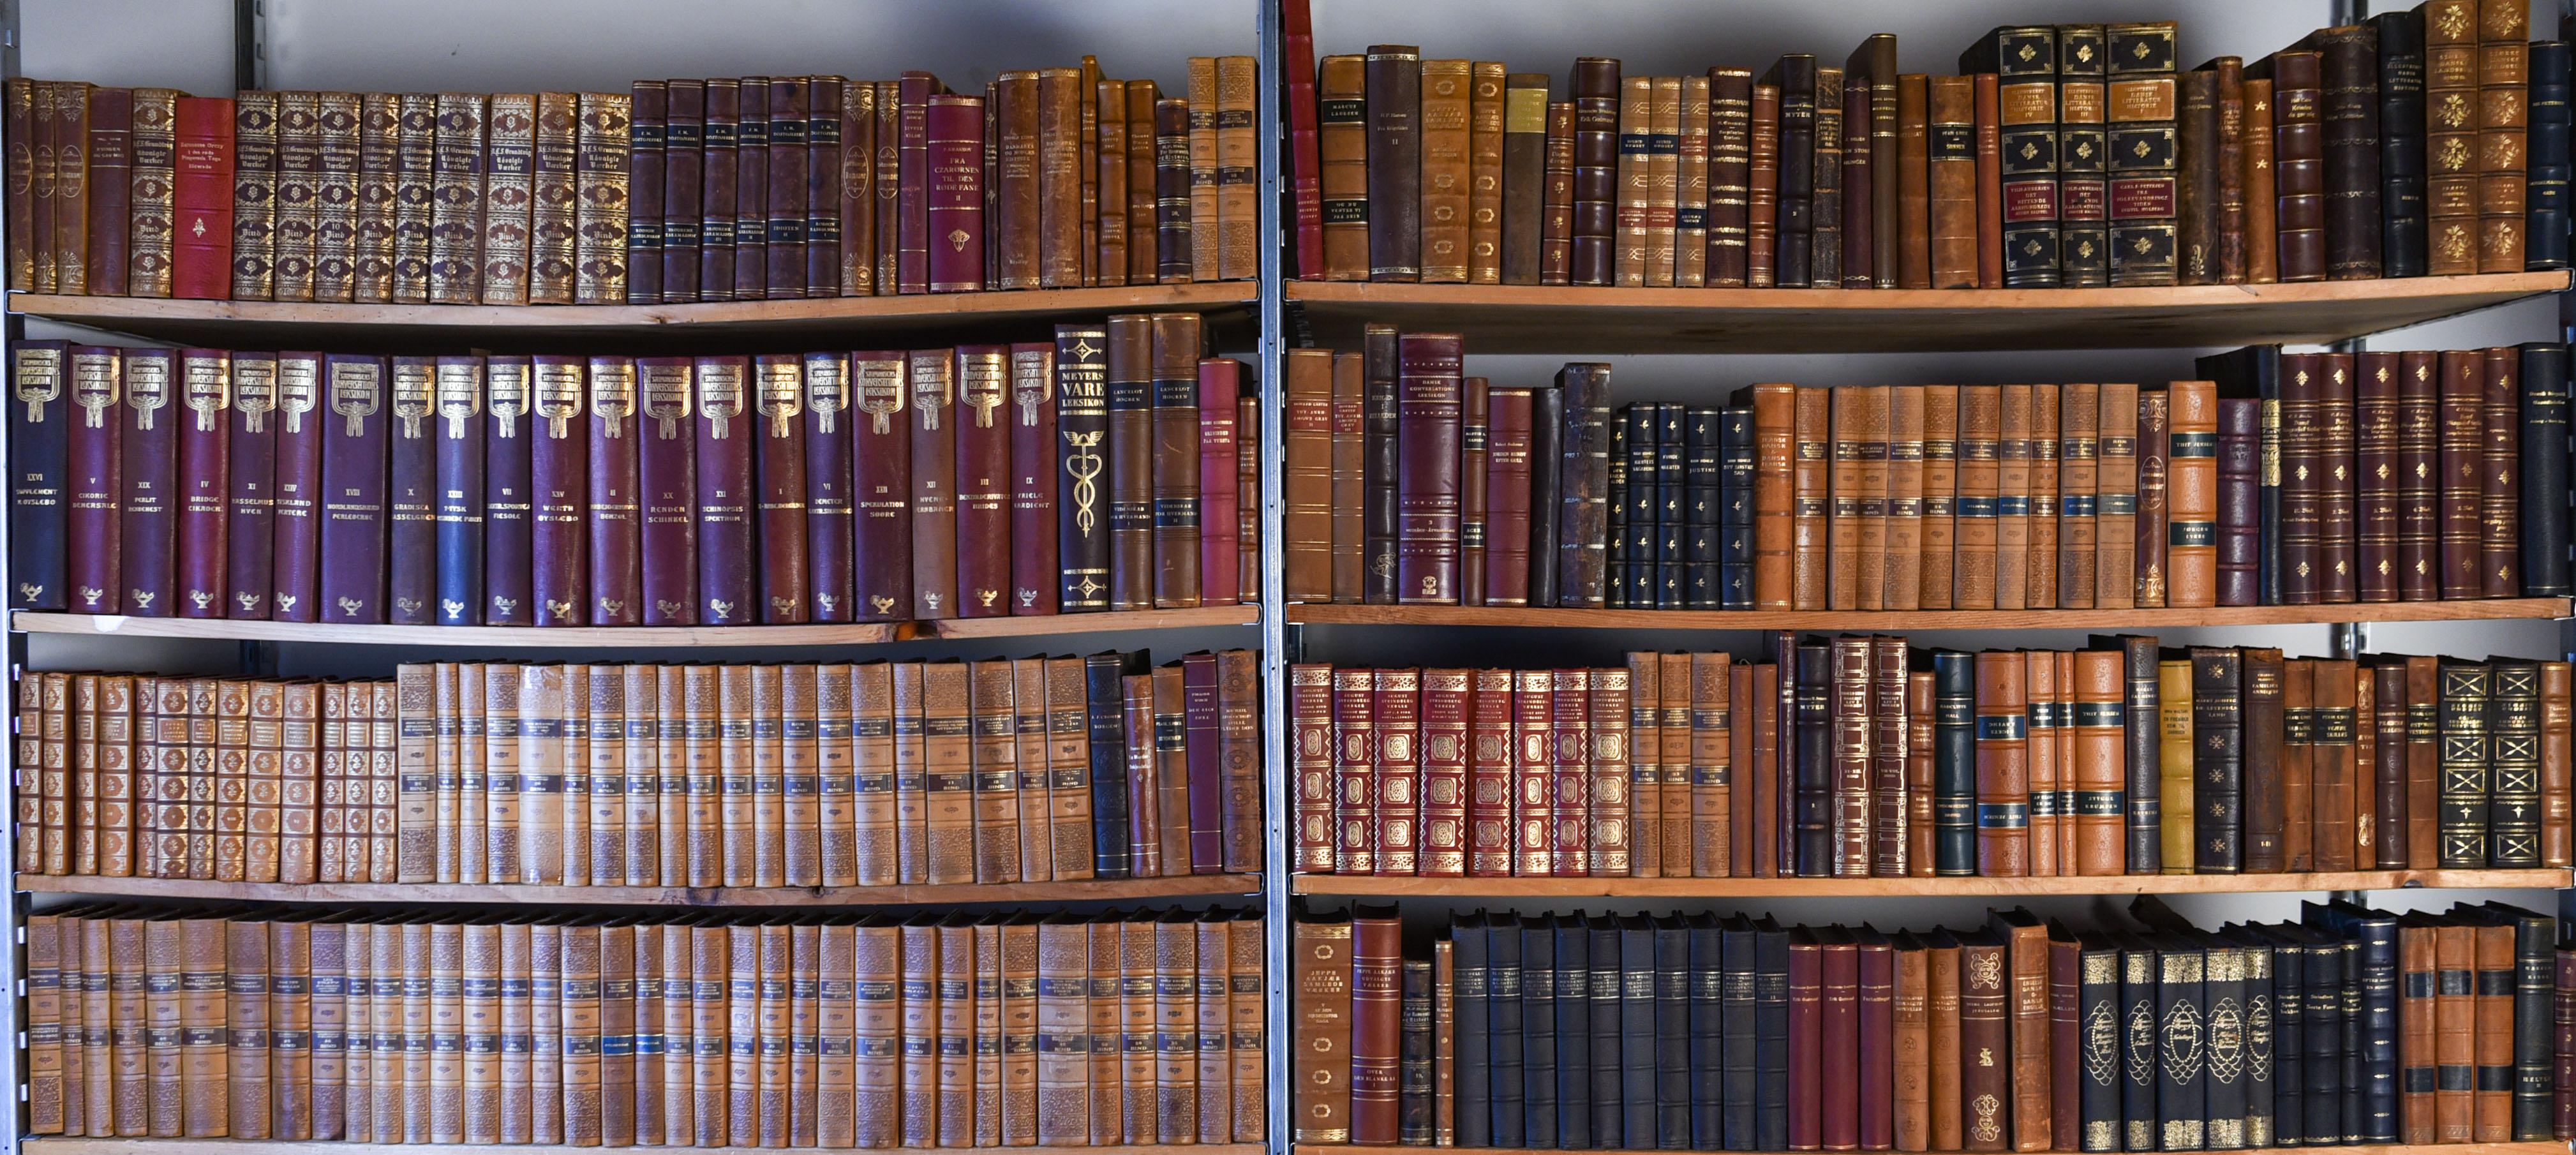 Start your own library with this incredible large collection of Danish antique leather bound books. These would be a fantastic way to decorate a library room. All are in Danish. Approximately ten boxes full of books of various sizes and colors.